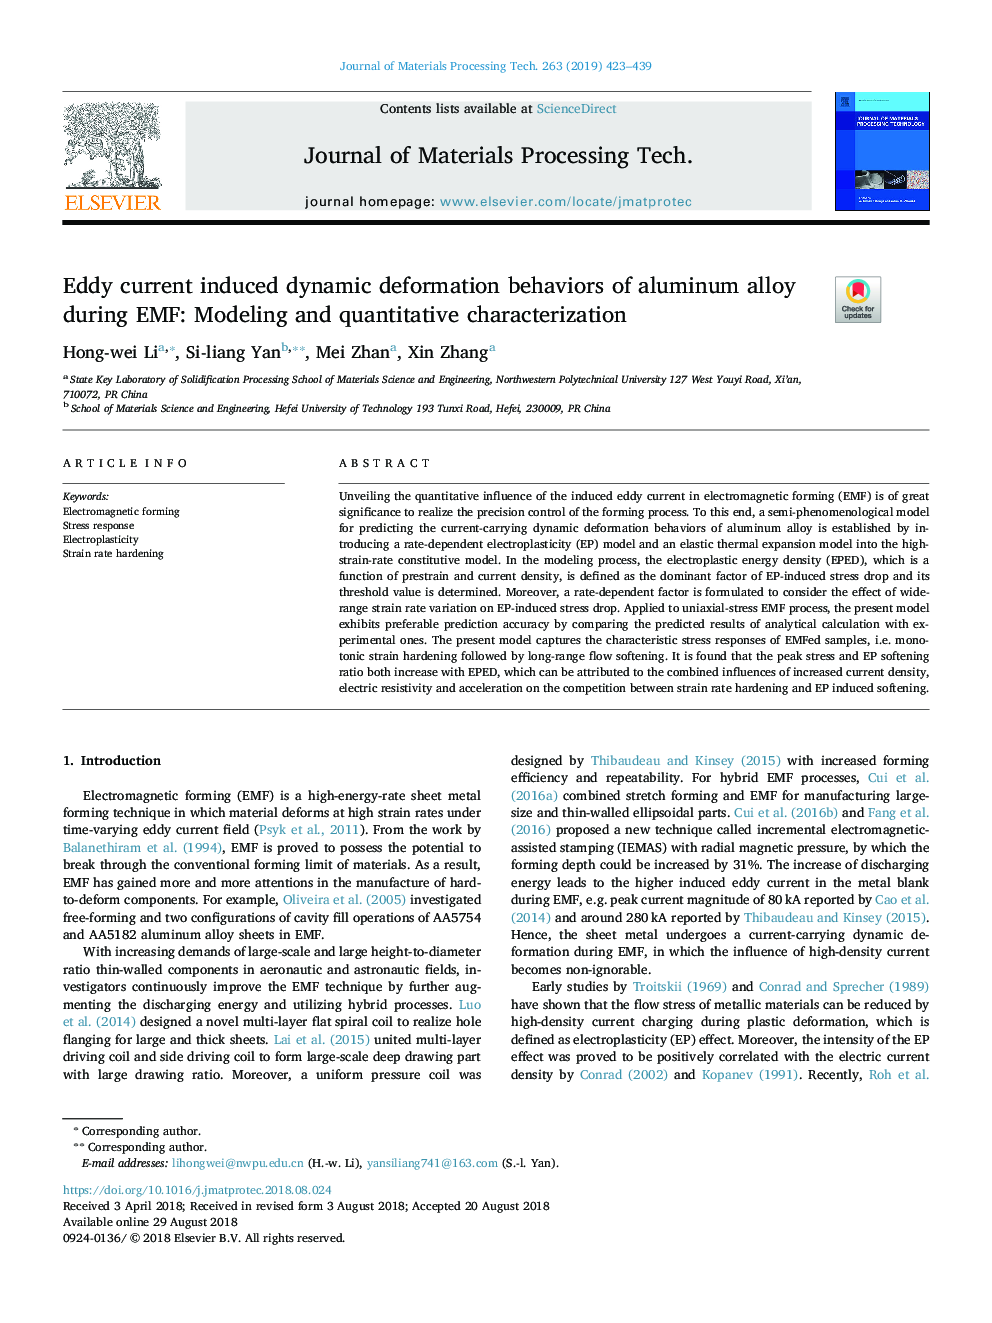 Eddy current induced dynamic deformation behaviors of aluminum alloy during EMF: Modeling and quantitative characterization